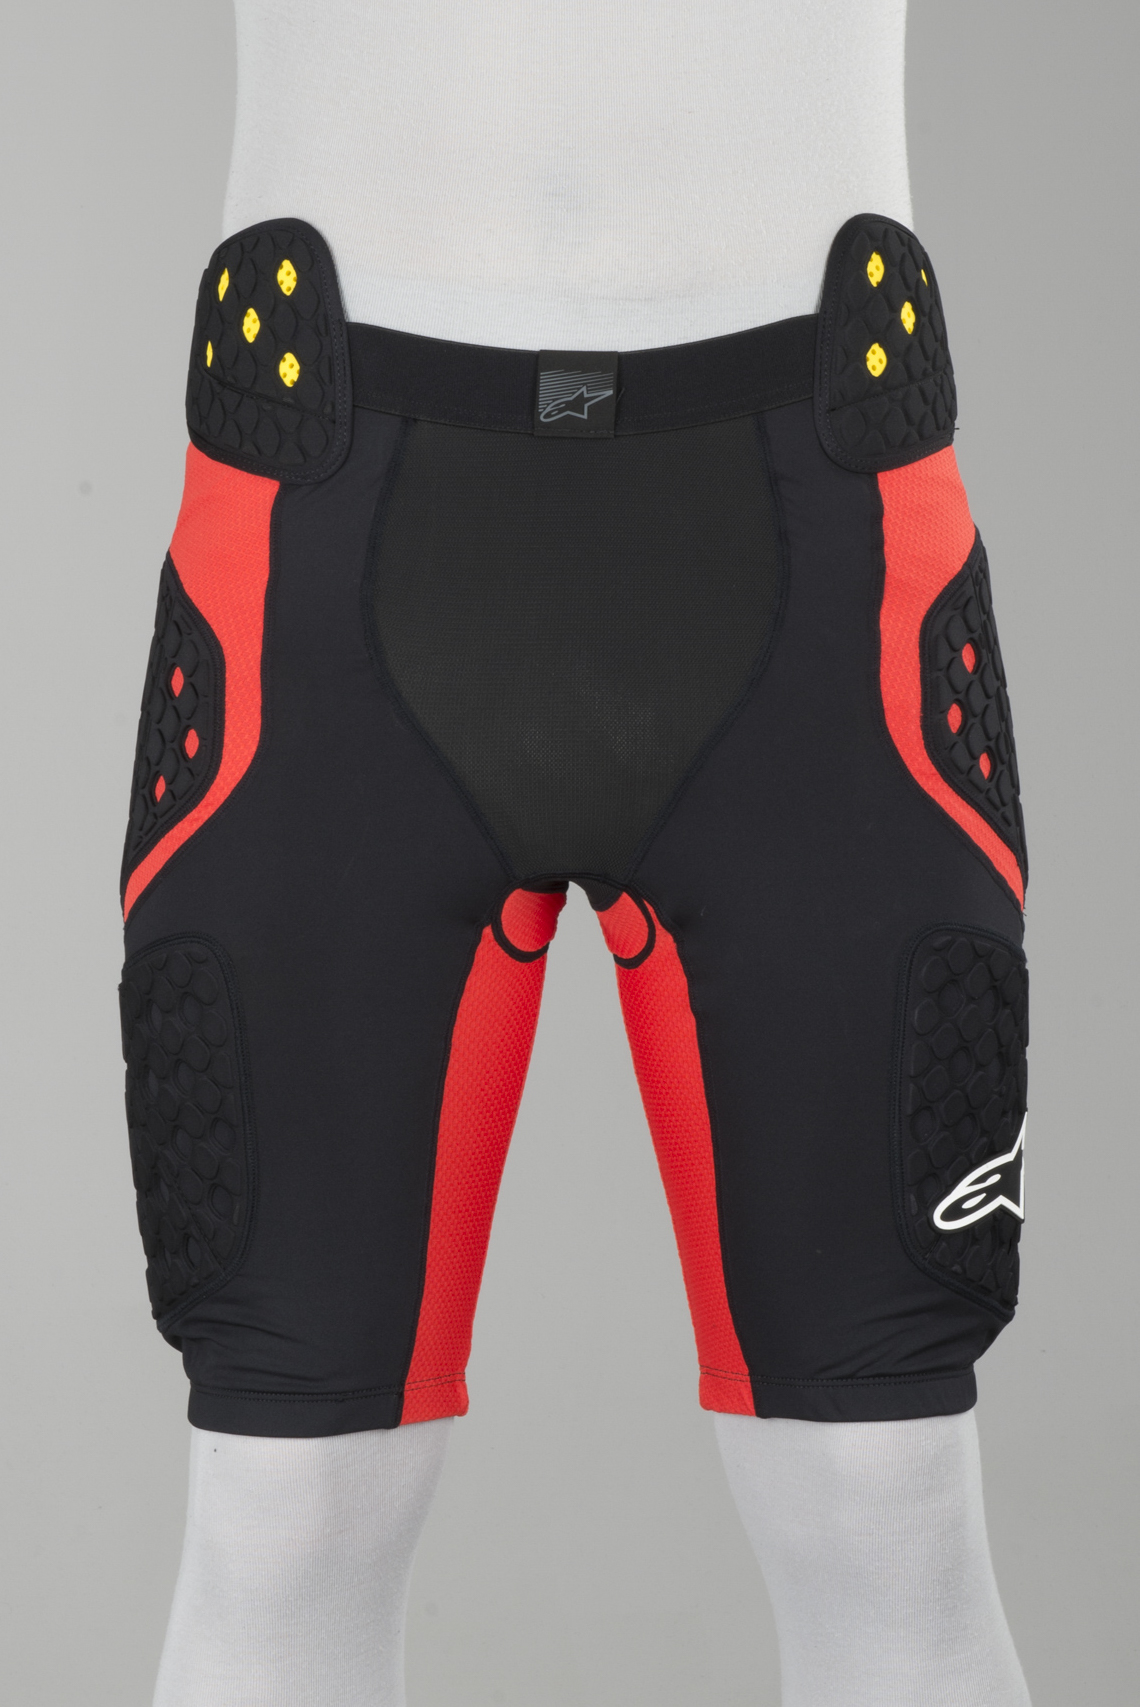 NEW ALPINESTARS SEQUENCE PRO MOTO DIRT BIKE PROTECTION SHORTS ALL SIZES